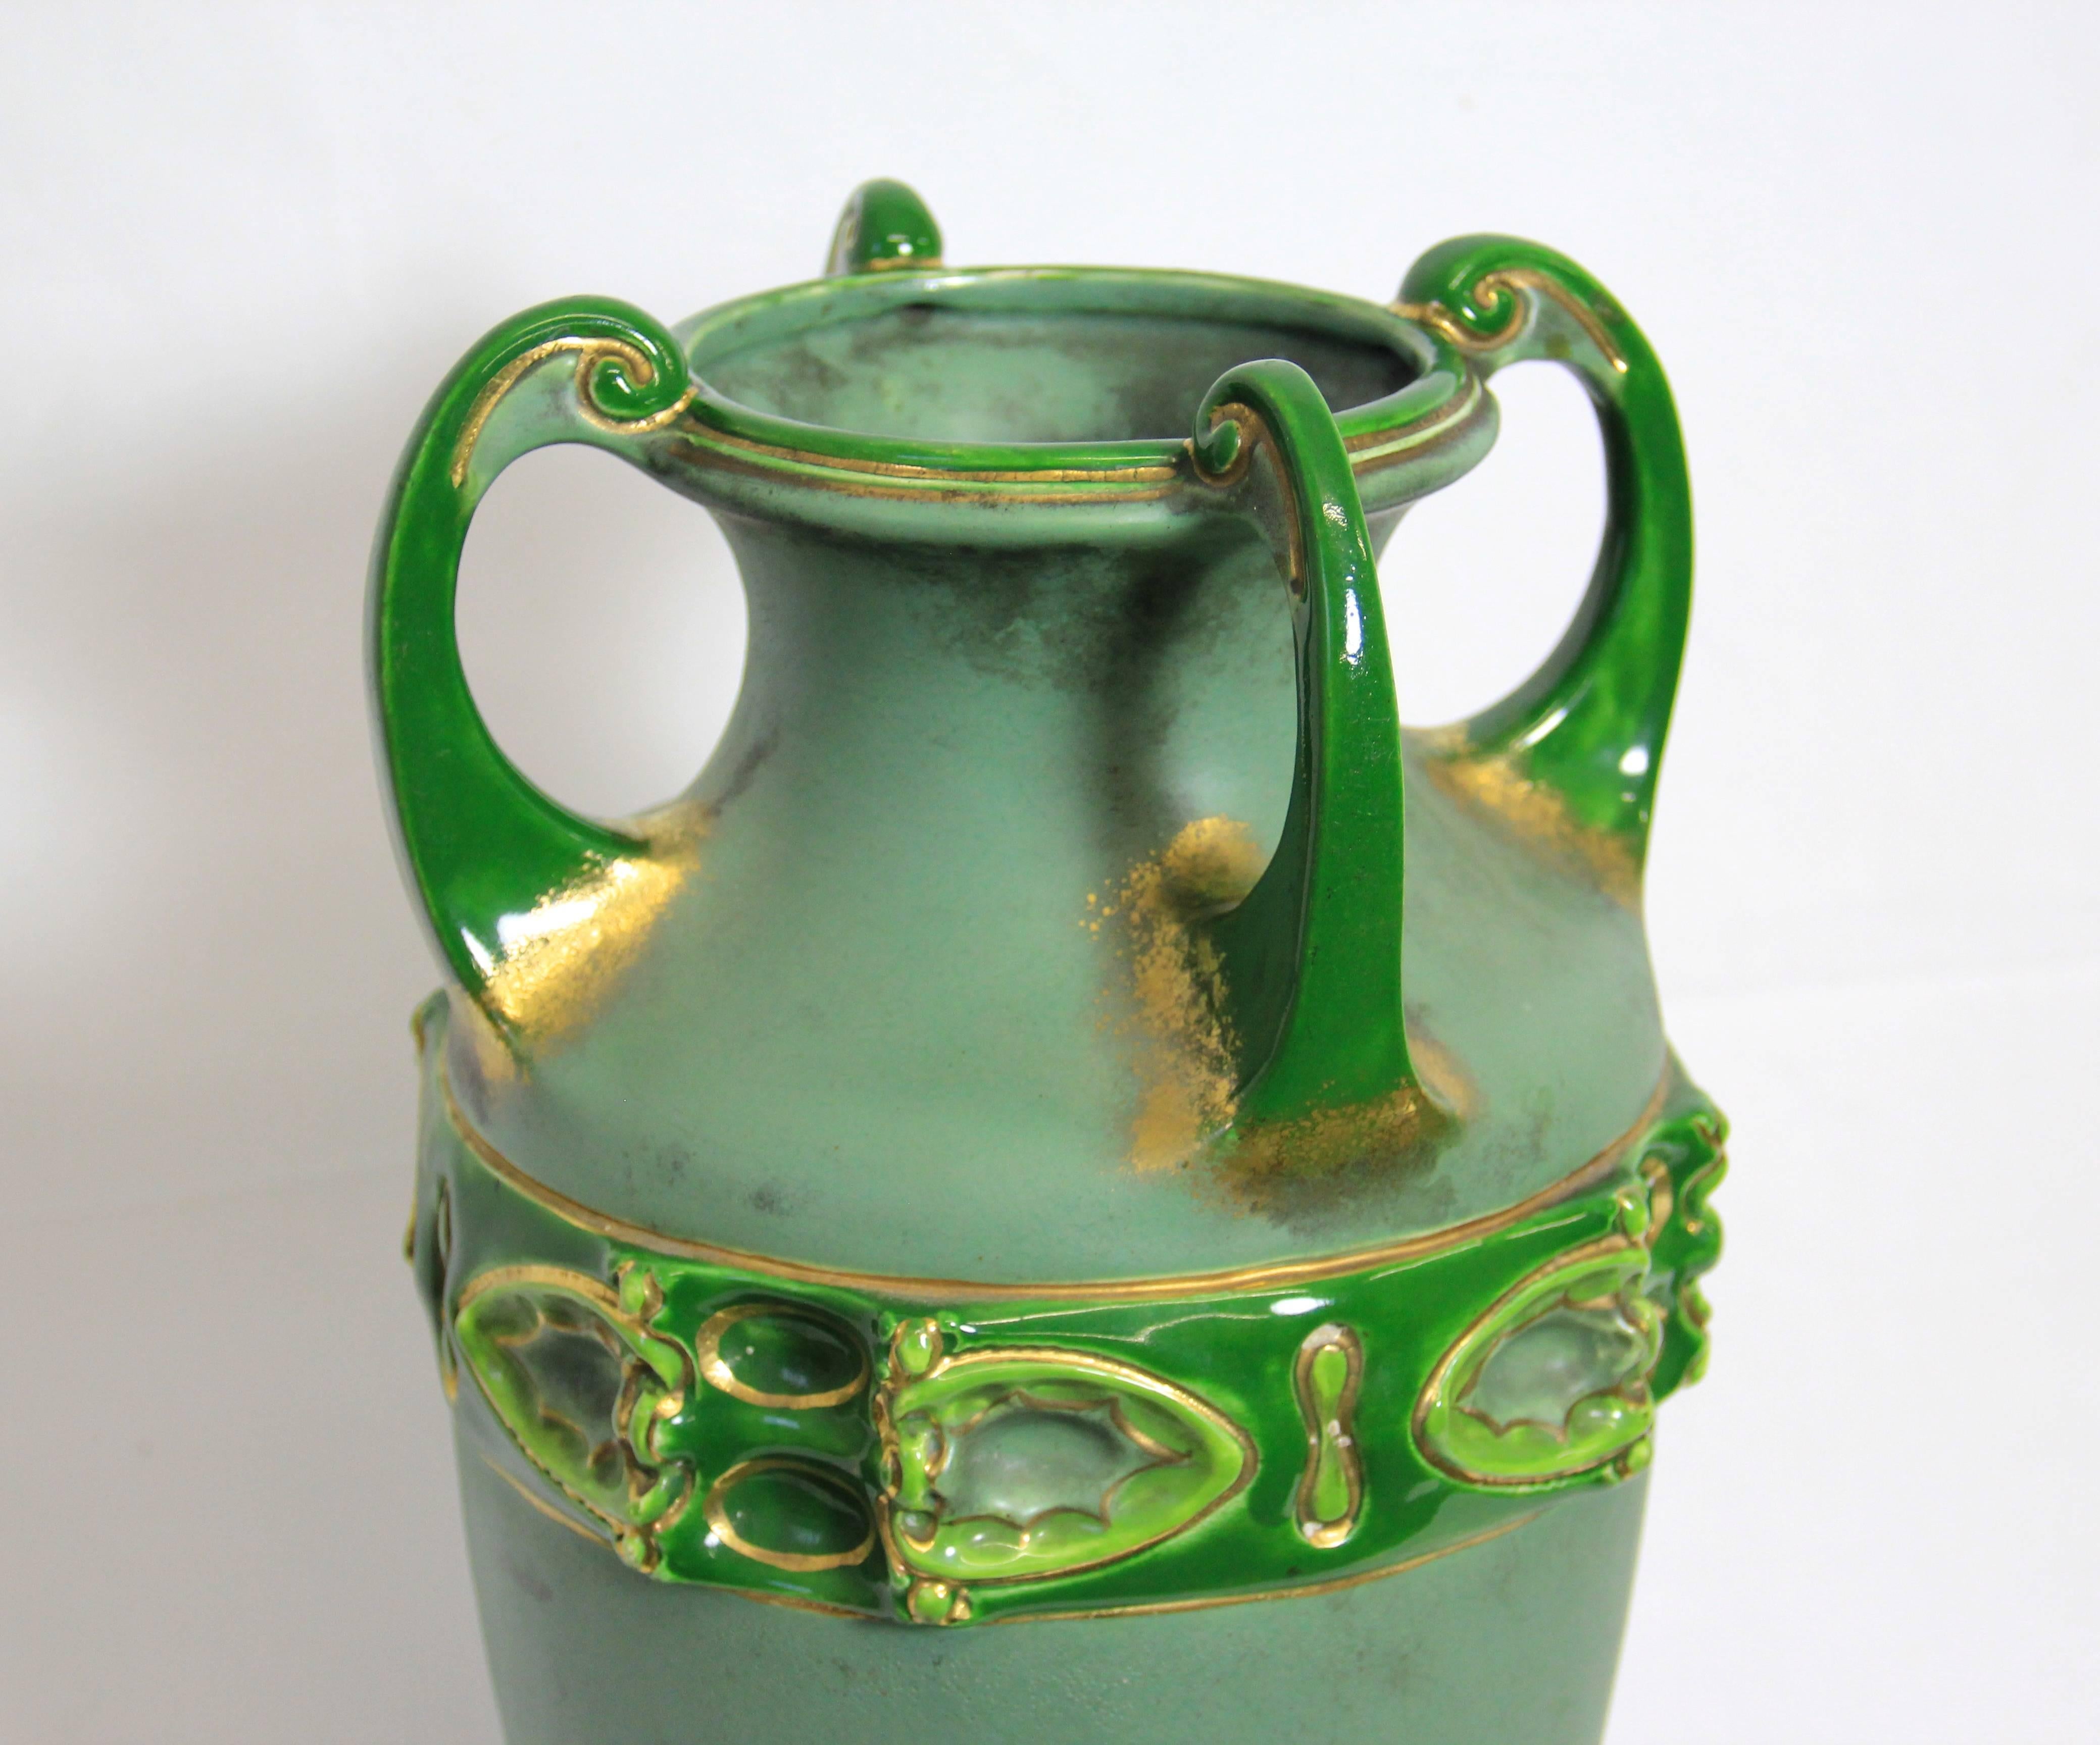 This Outstanding Amphora Vase is an absloute classical piece of the Art Nouveau era. The beautiful organic design, the amazing green tones and the golden accents are simply stunning. Manufactured was this vase by the famous austrian company 